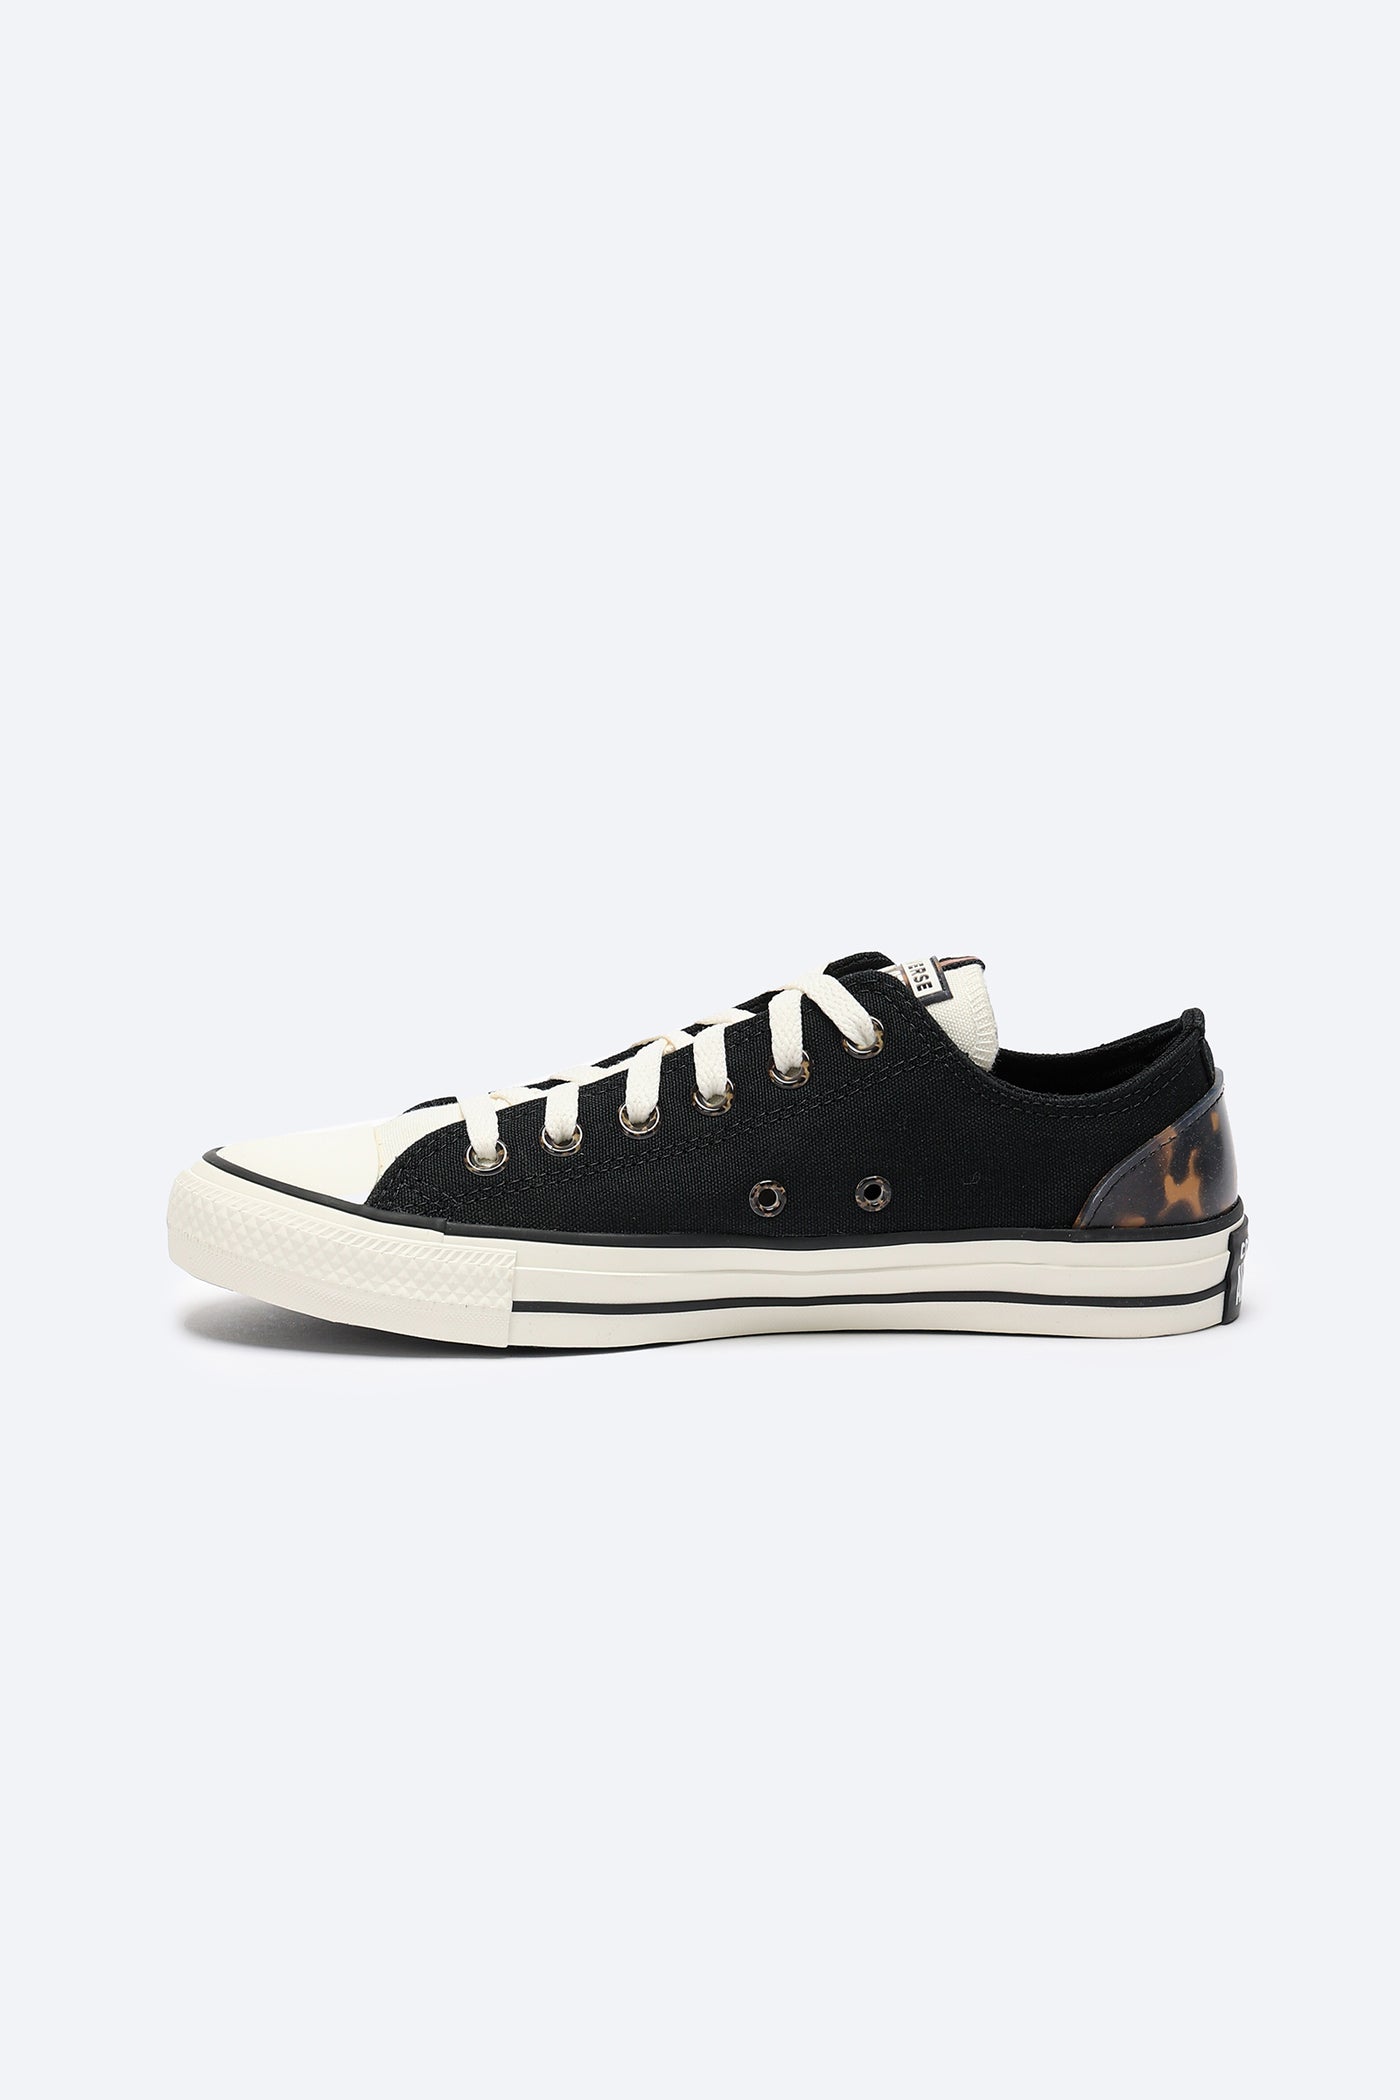 Sneakers - Chuck Taylor All Star - Back Patterned